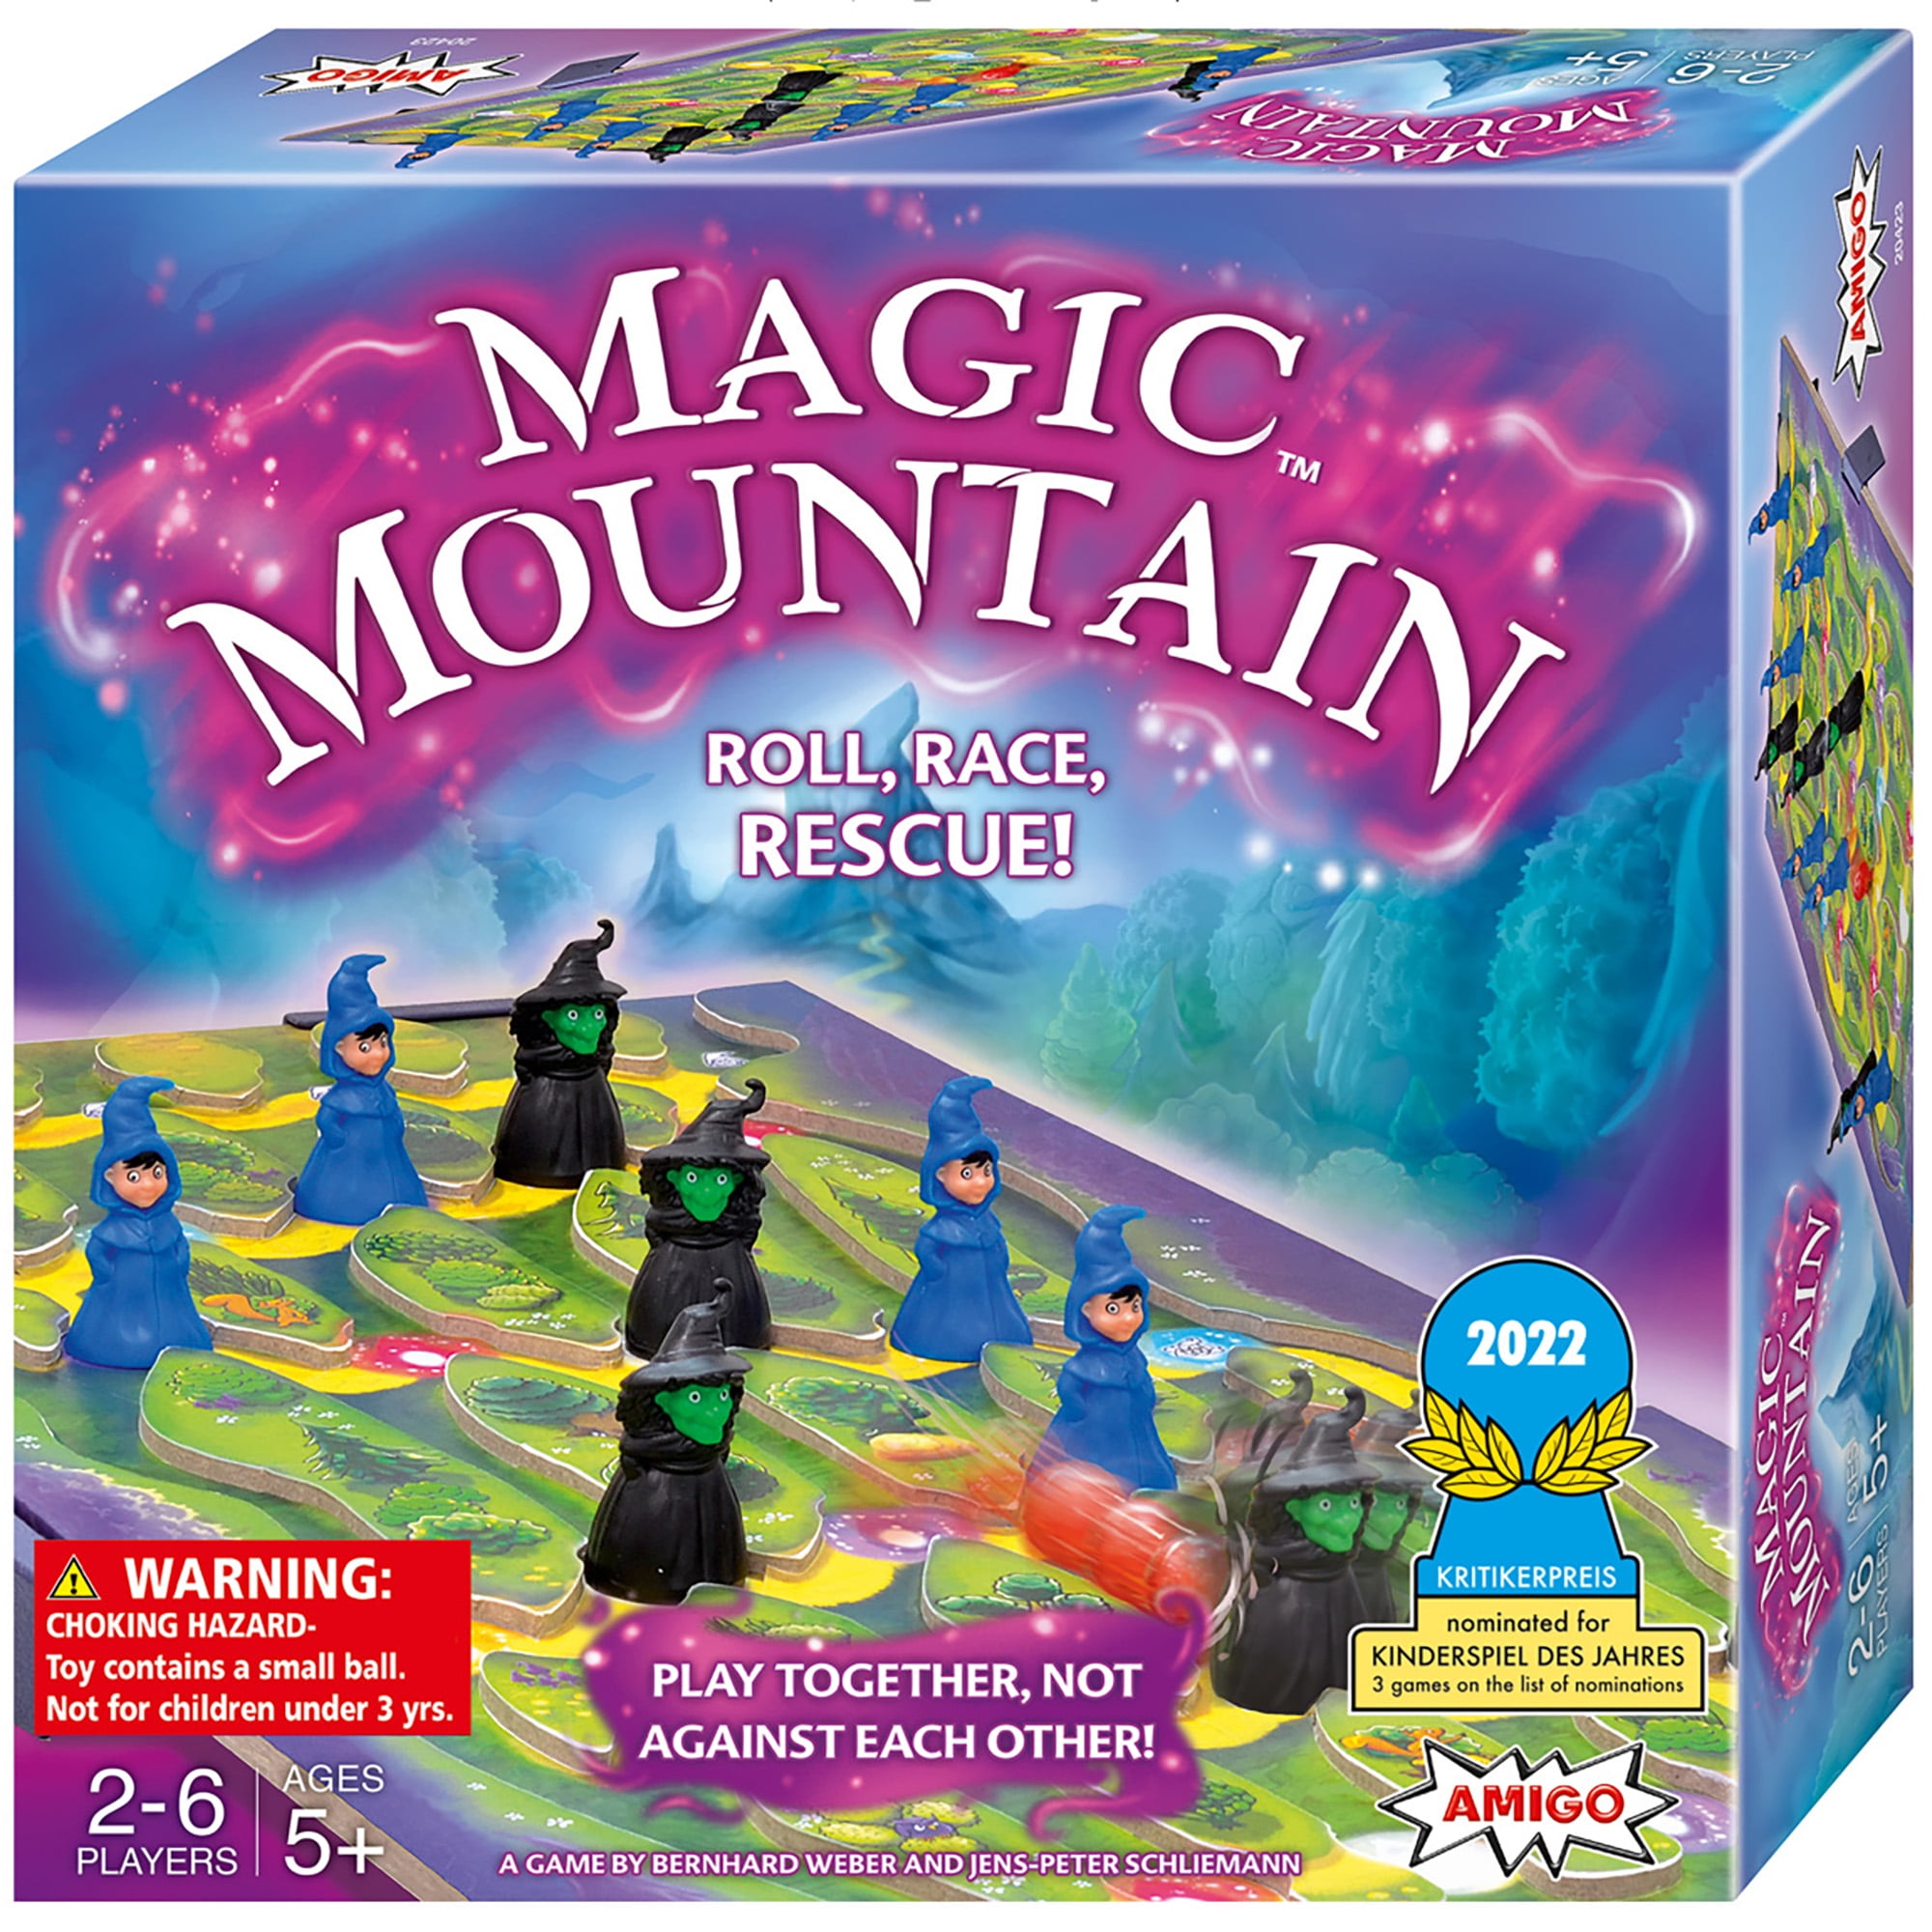 Holiday Board Game Gift Guide 2023 - killer board game gifts — Meeple  Mountain